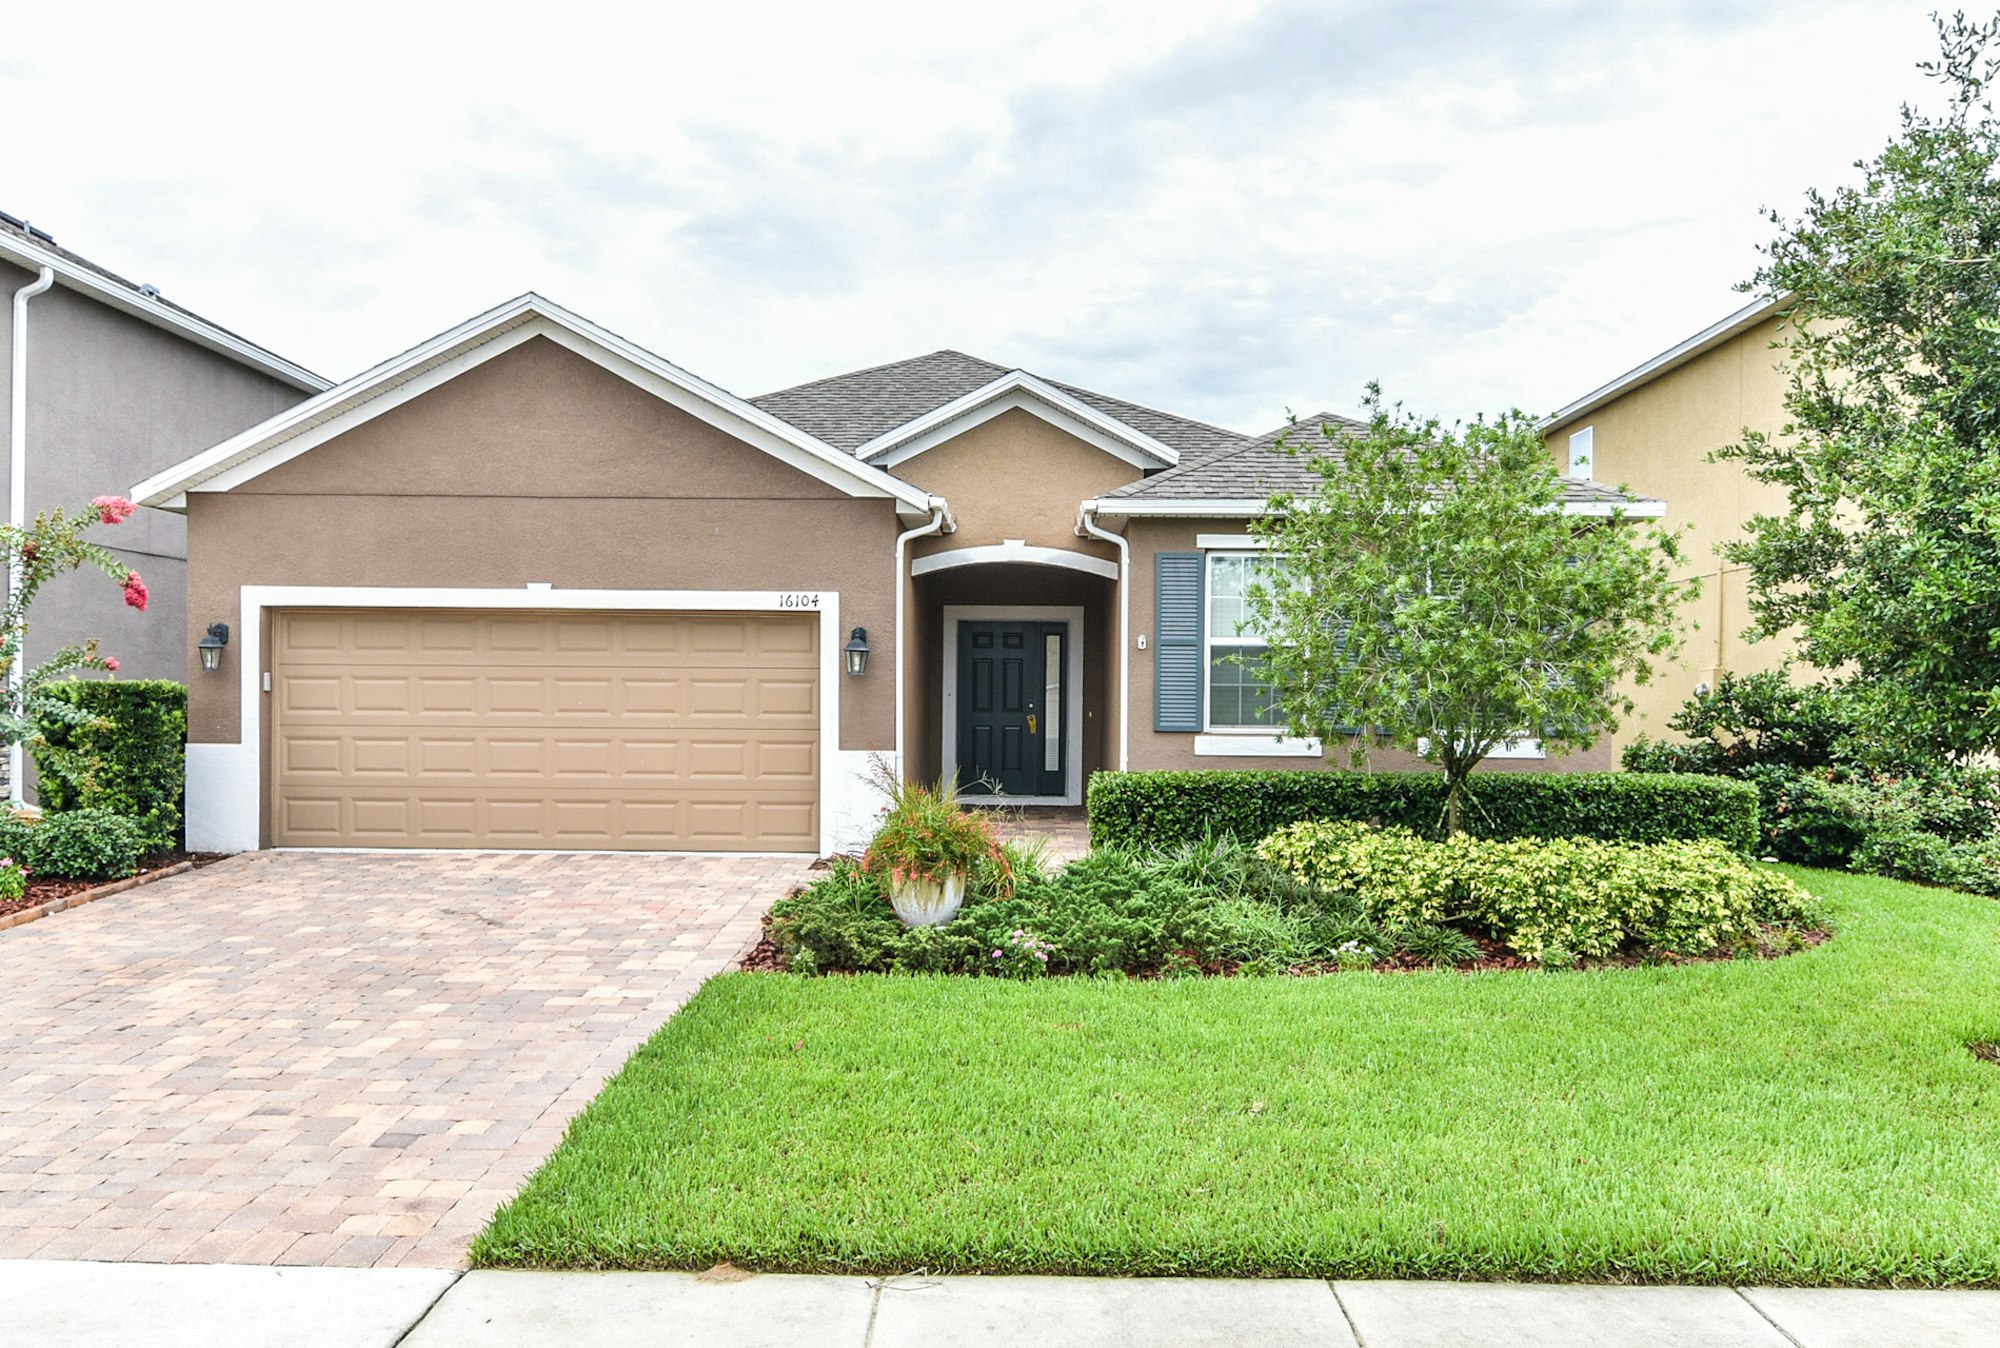 Photo 1 of 28 - 16104 Yelloweyed Dr, Clermont, FL 34714